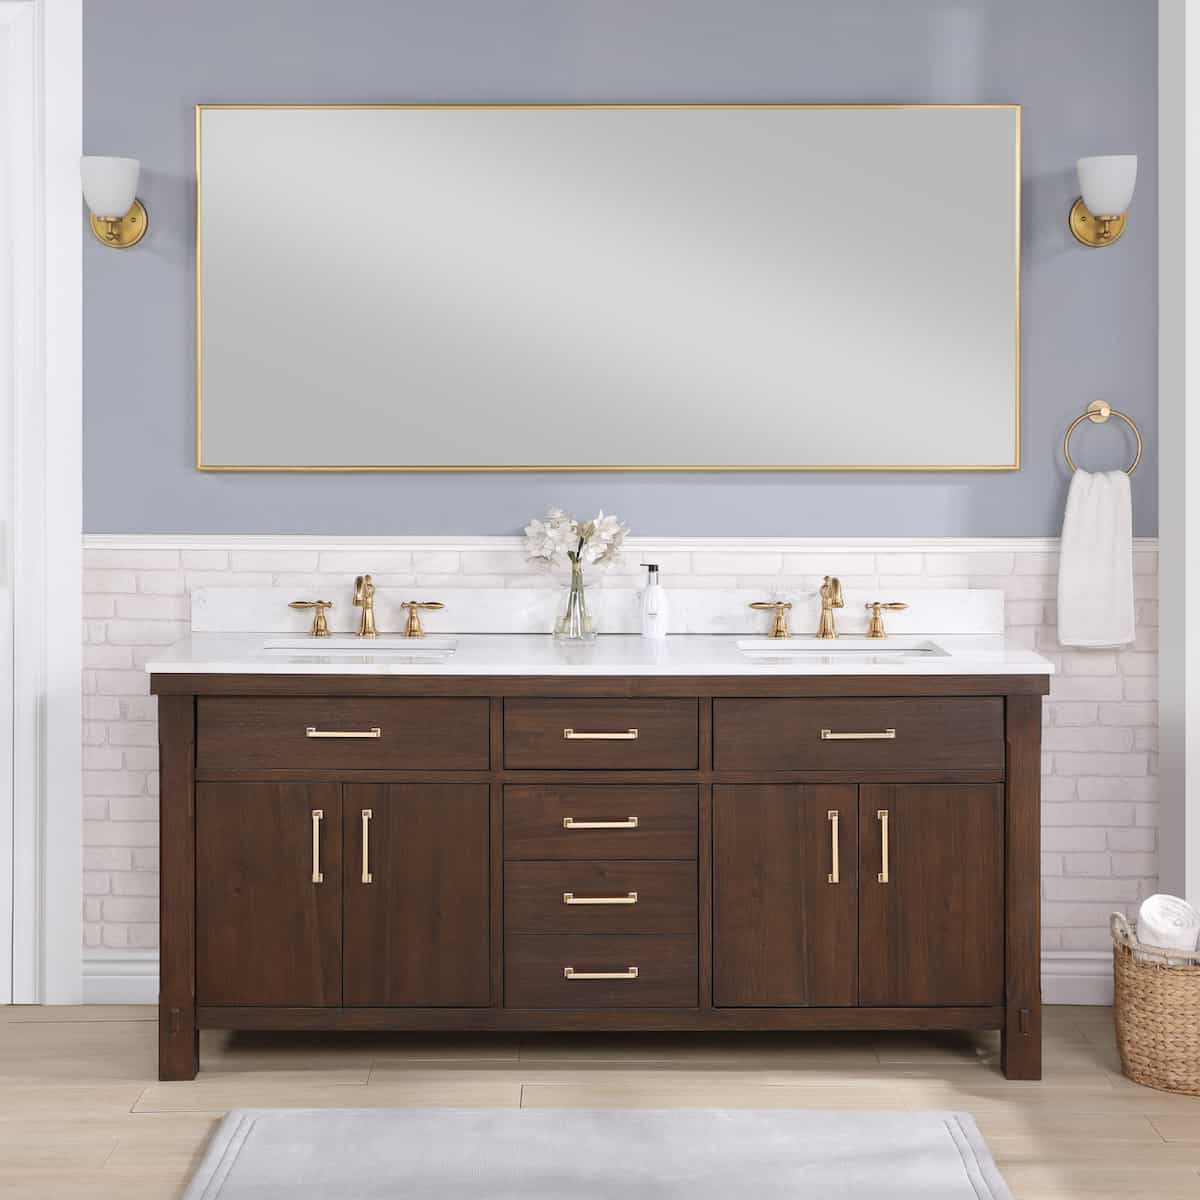 Vinnova Viella 72 Inch Freestanding Double Sink Bath Vanity in Deep Walnut Finish with White Composite Countertop With Mirror in Bathroom 701872-DW-WS